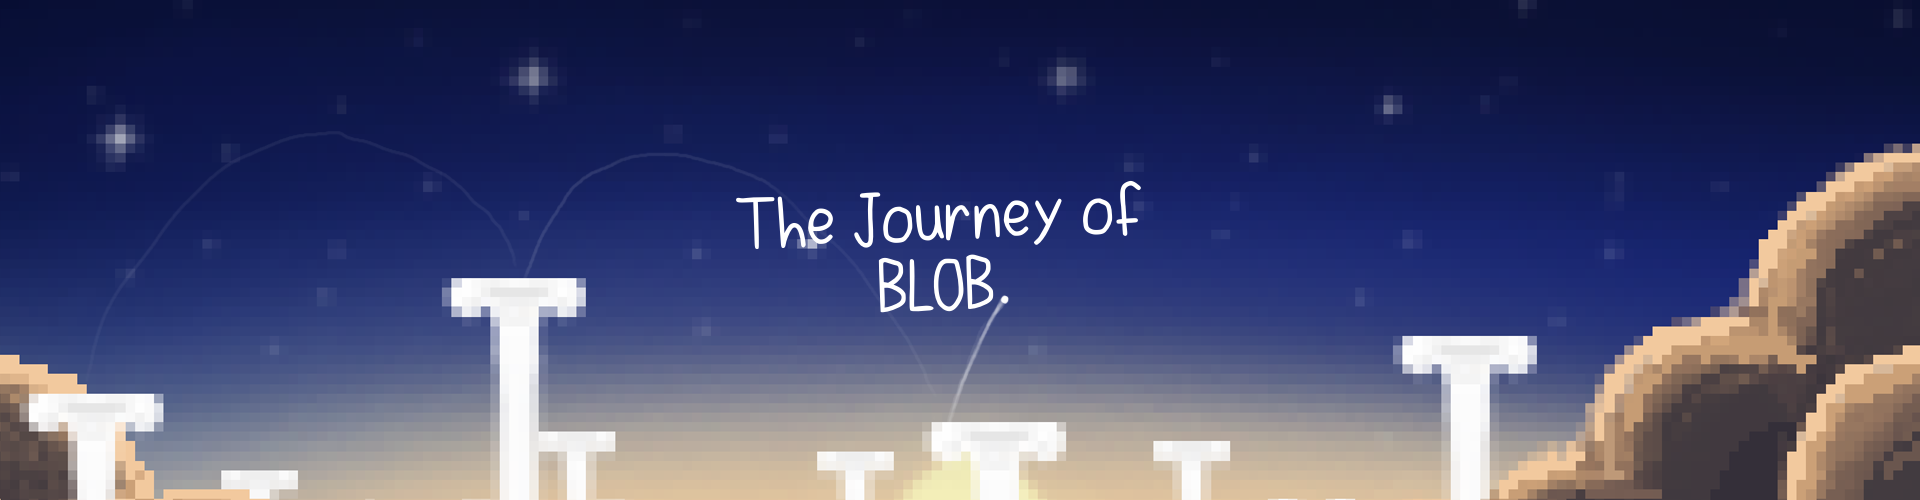 The Journey of Blob